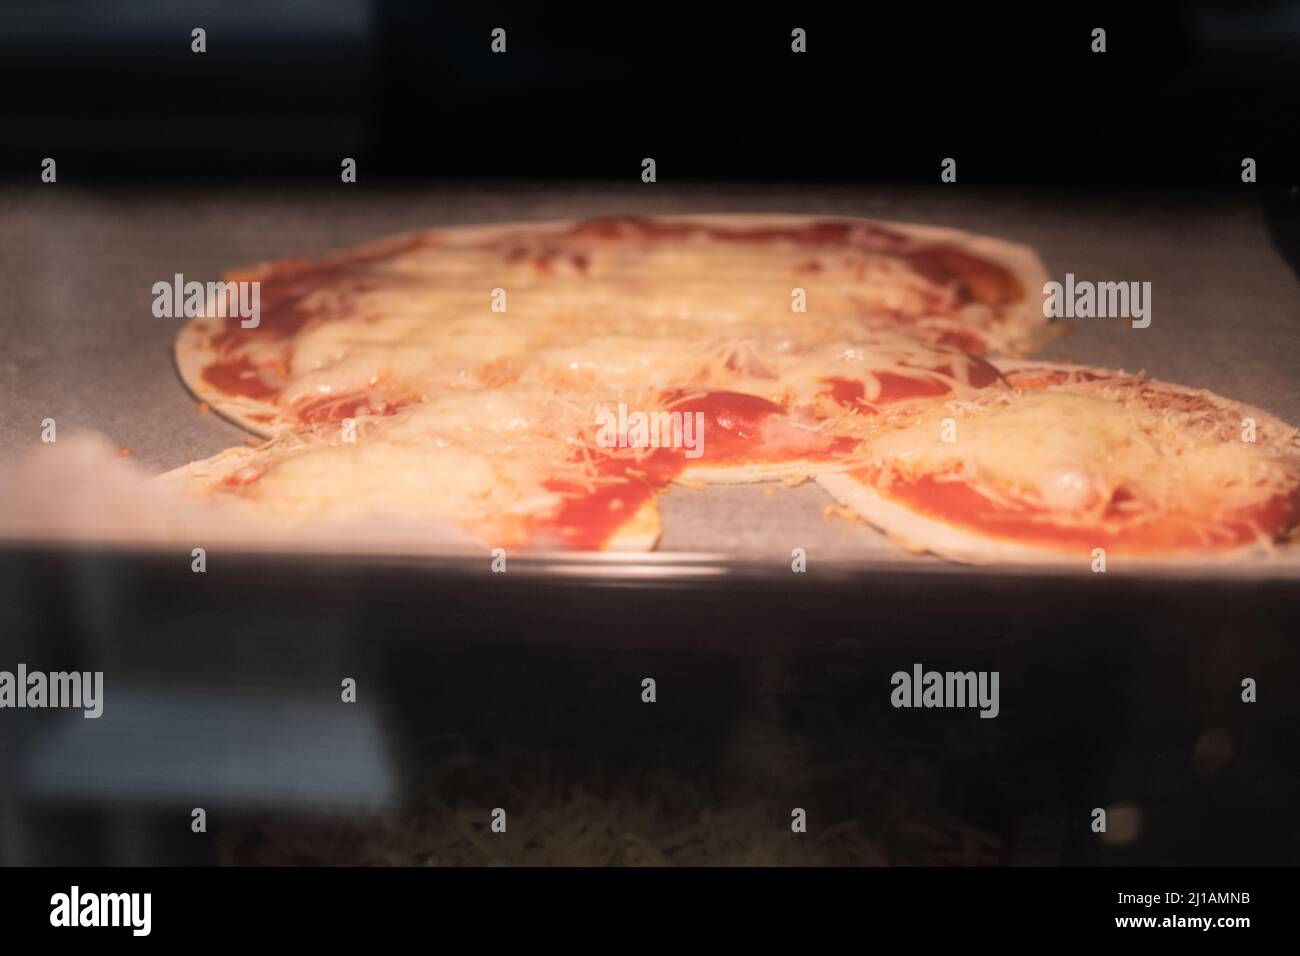 Cheese pizza with strange shape being cooked on a domestic oven Stock Photo